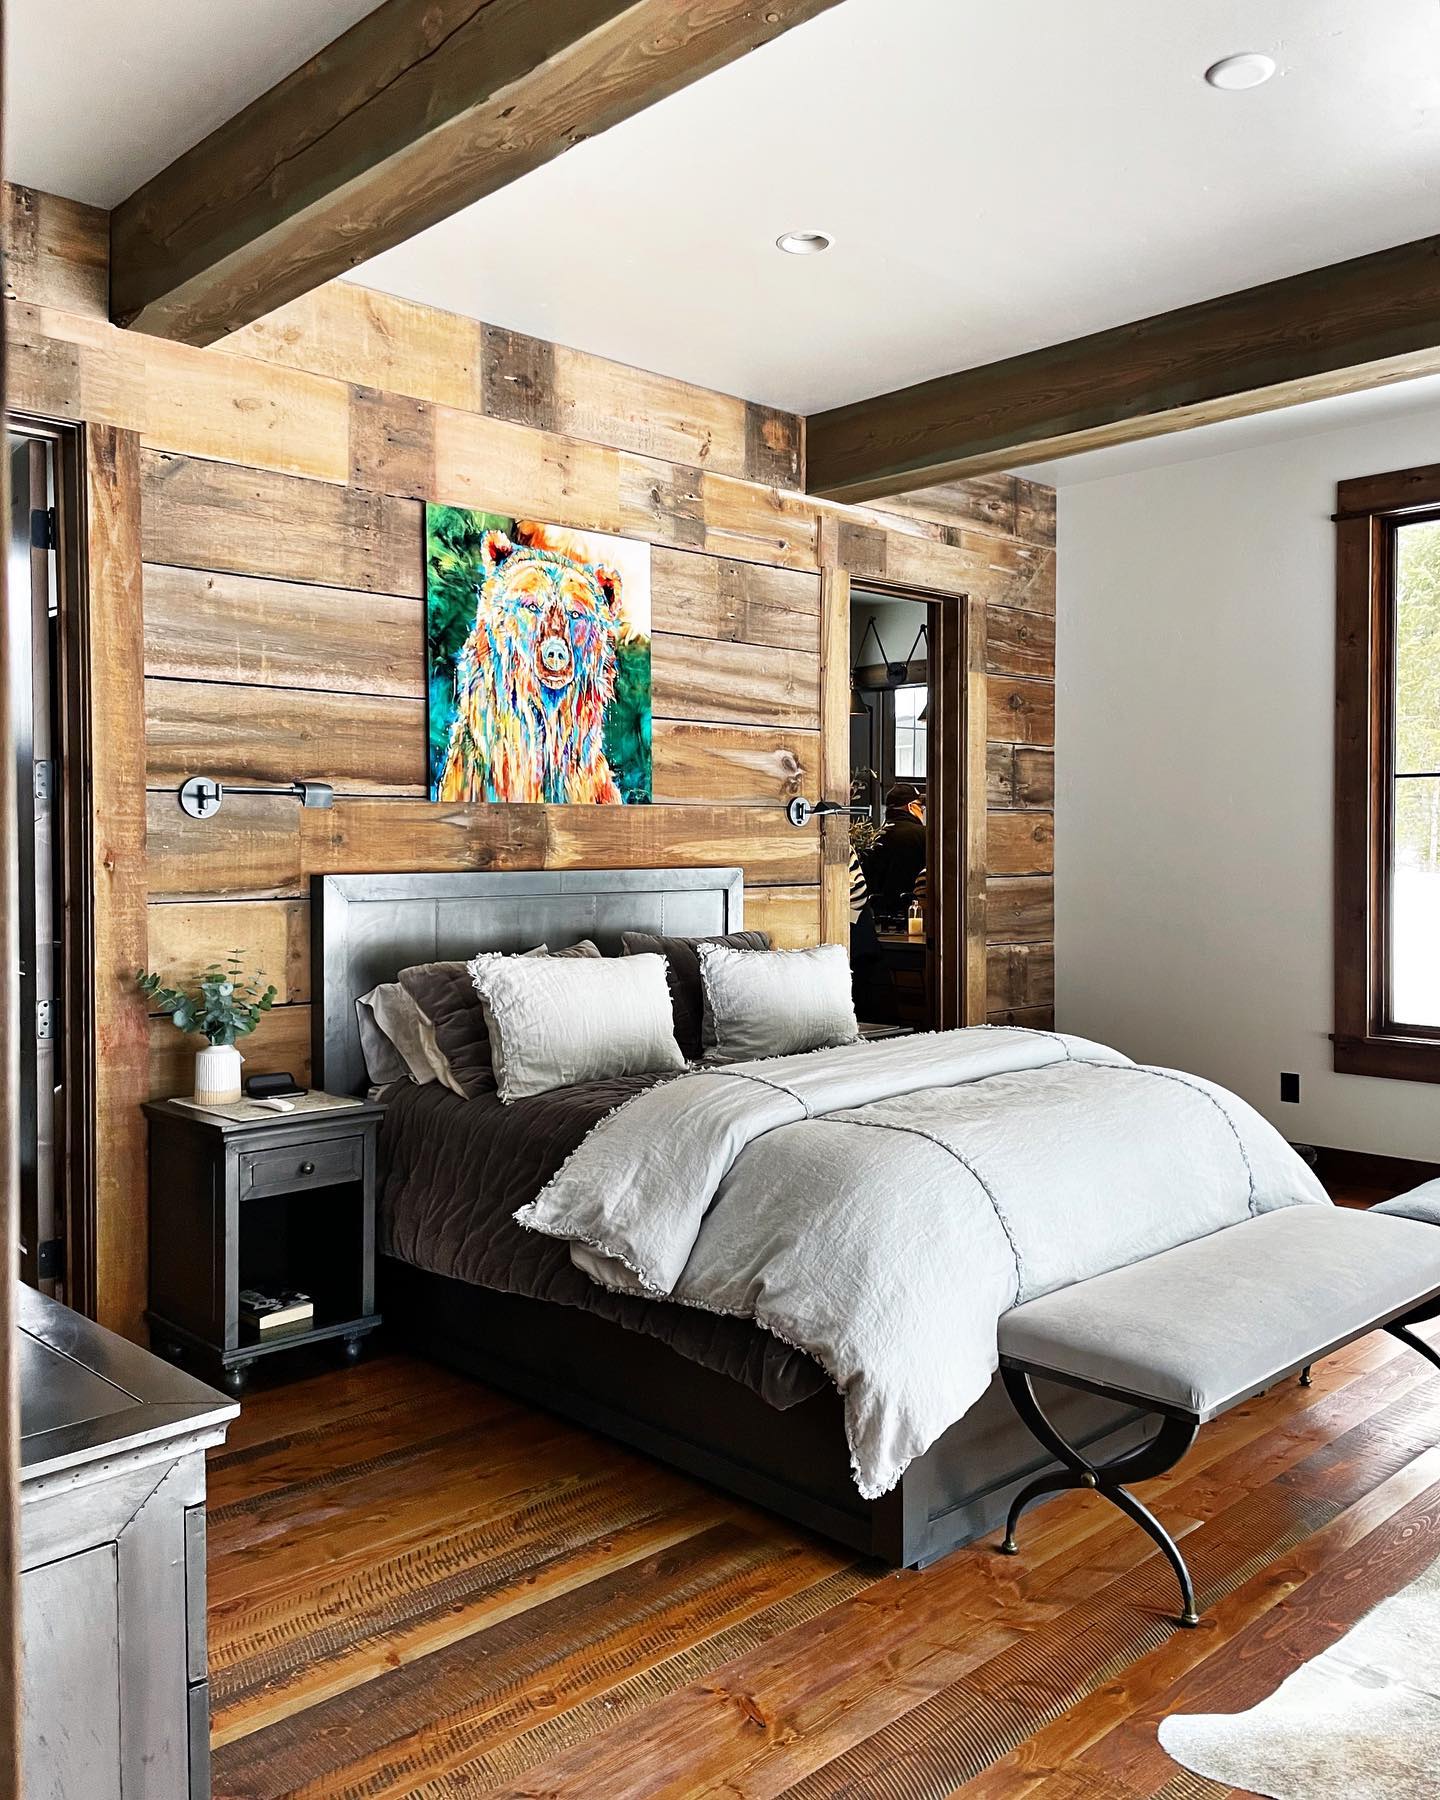 Cozy way to finish off the room. Mountain modern done right. whitefish custom home builder